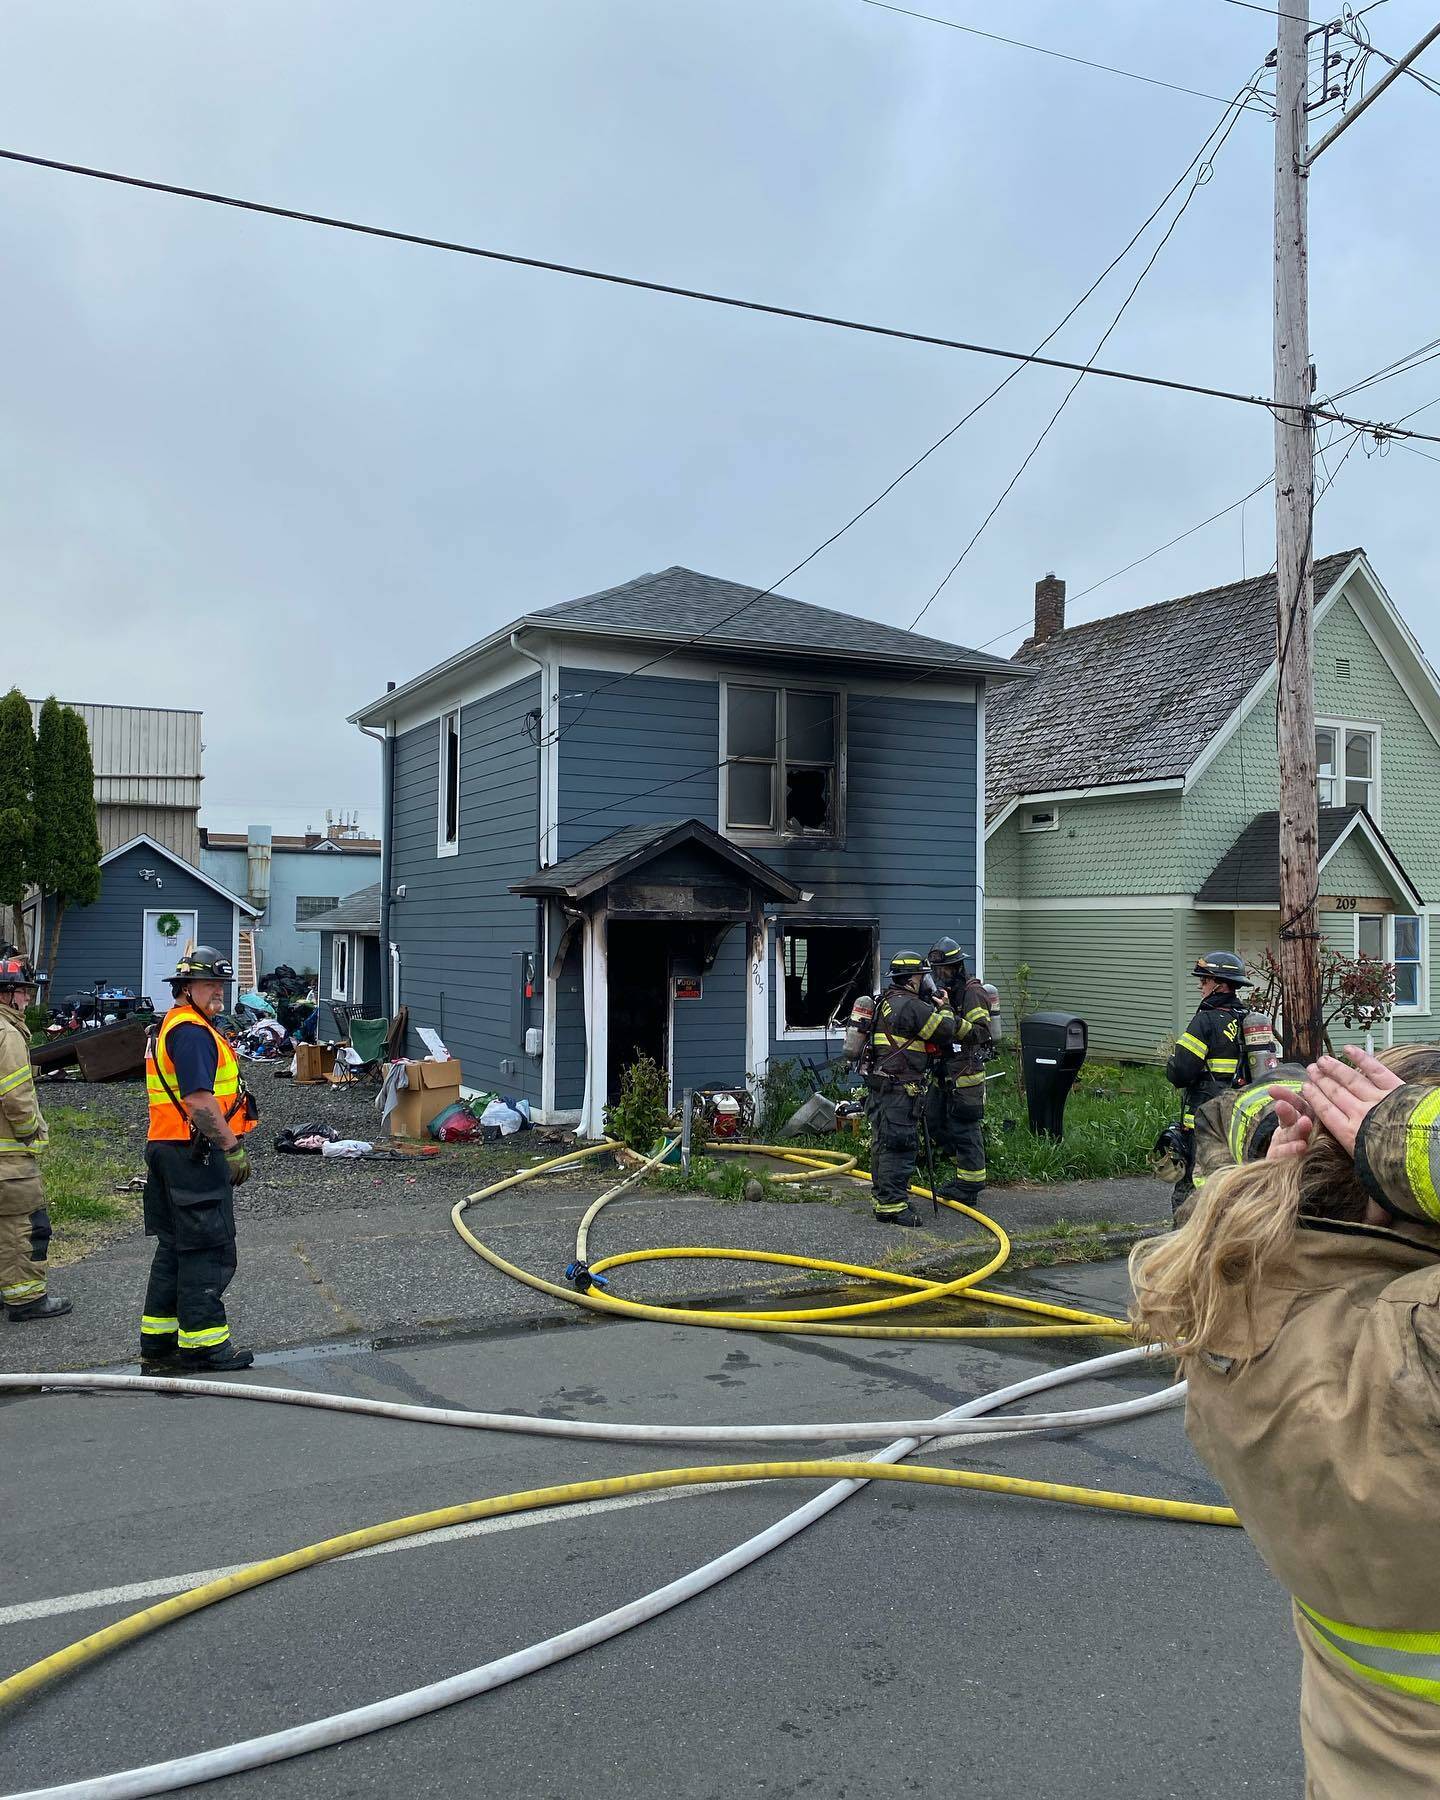 Firefighters from Aberdeen and Hoquiam responded to a fire at a residence in Hoquiam on May 20, rapidly knocking down the fire. (Courtesy photo / Hoquiam Fire Department)